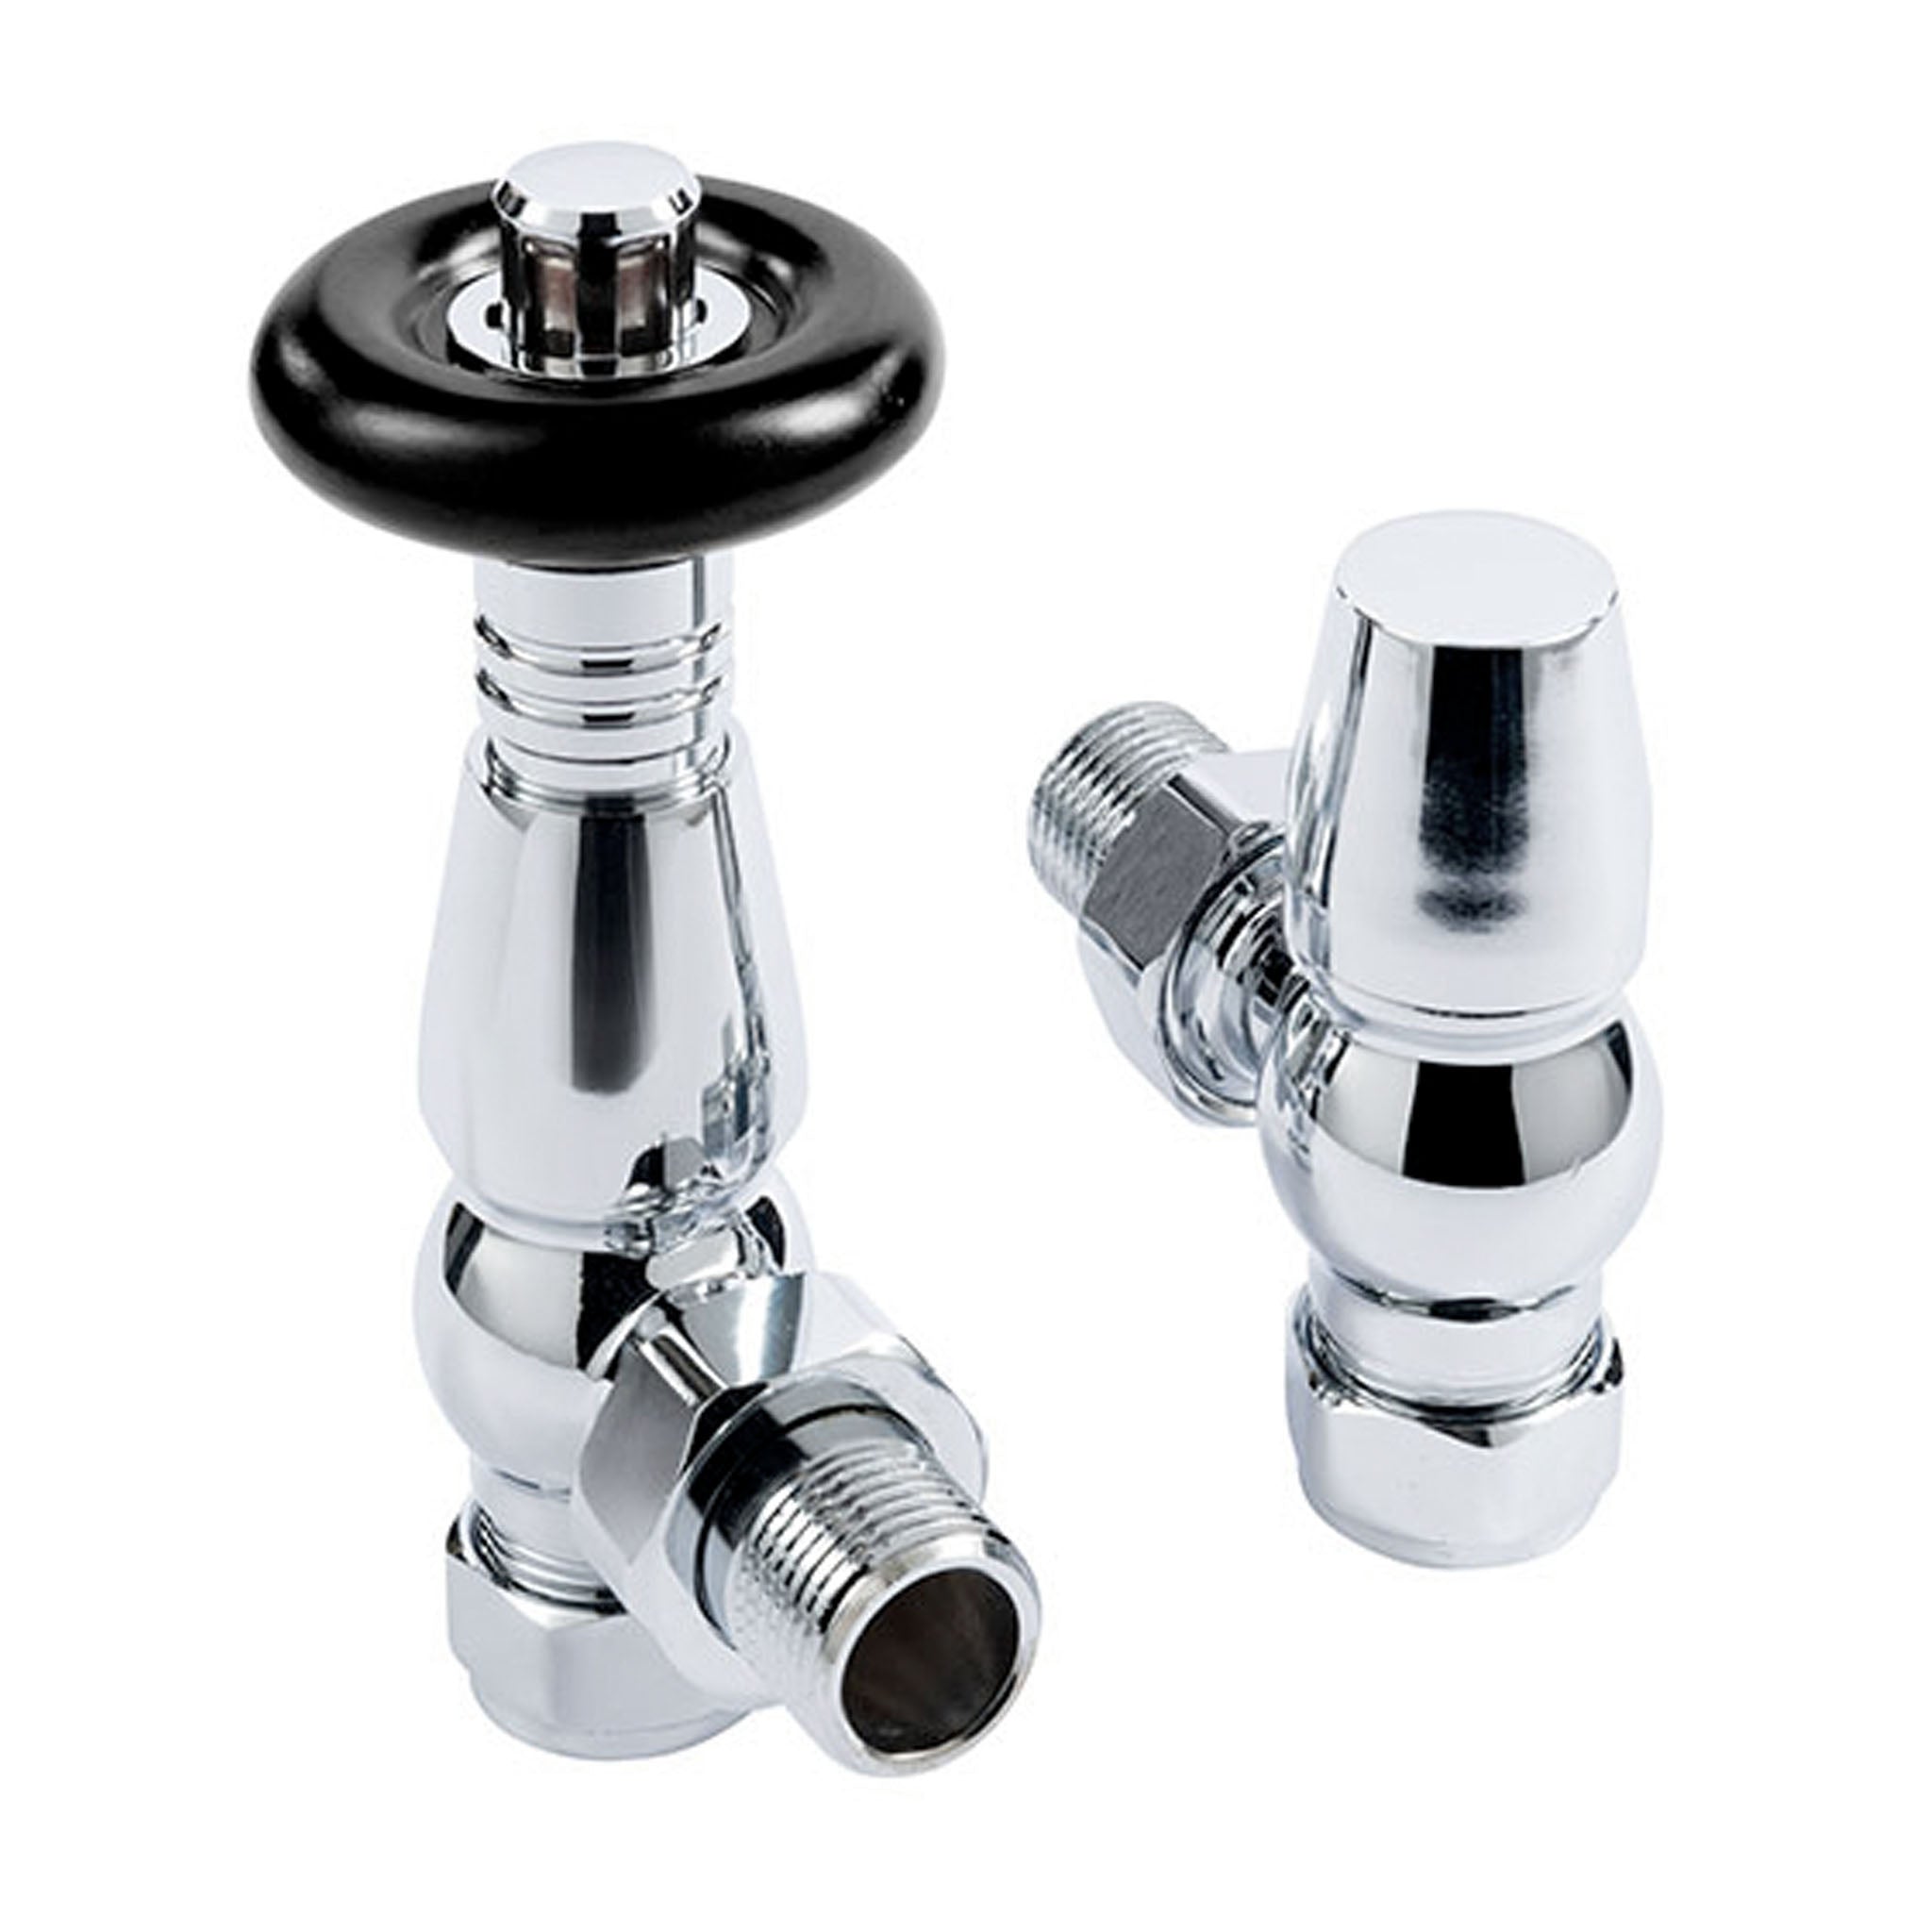 Vogue Excelsior Thermostatic Angled Valves 1/2" x 15mm (Pair)